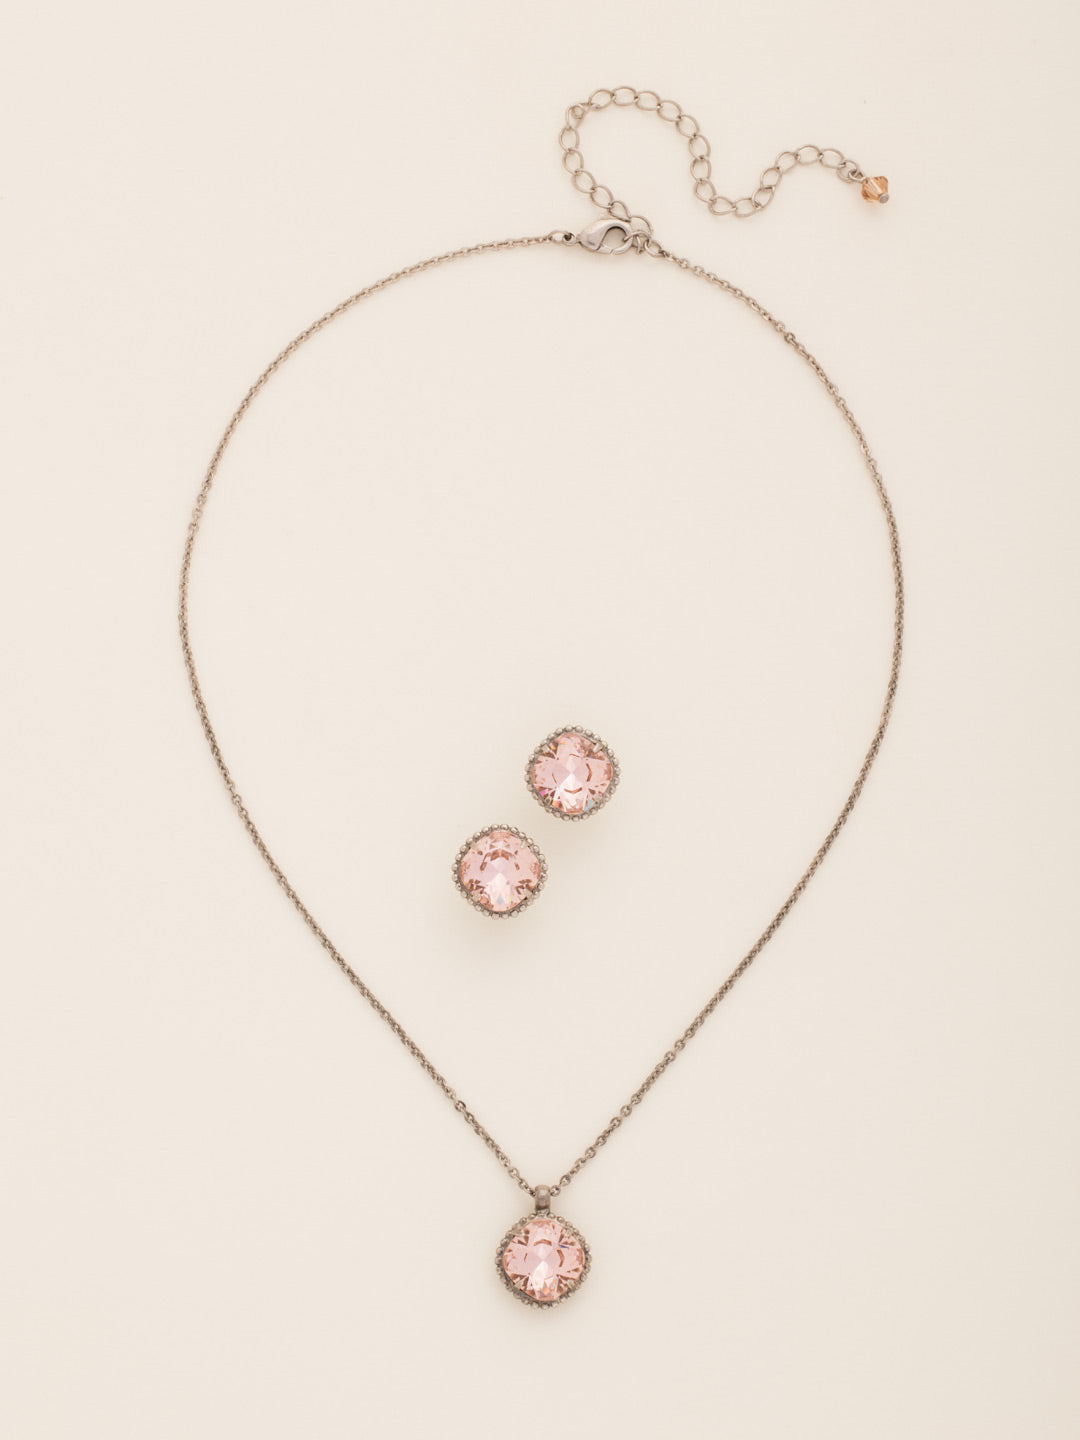 Cushion-Cut Solitaire Necklace and Earring Gift Set - GCT68ASSND - <p>Wear this set anywhere, everyday, for all around allure! This gift set features rounded-edge cushion cut stones encircled by a vintage inspired decorative edge border. From Sorrelli's Sand Dune collection in our Antique Silver-tone finish.</p>